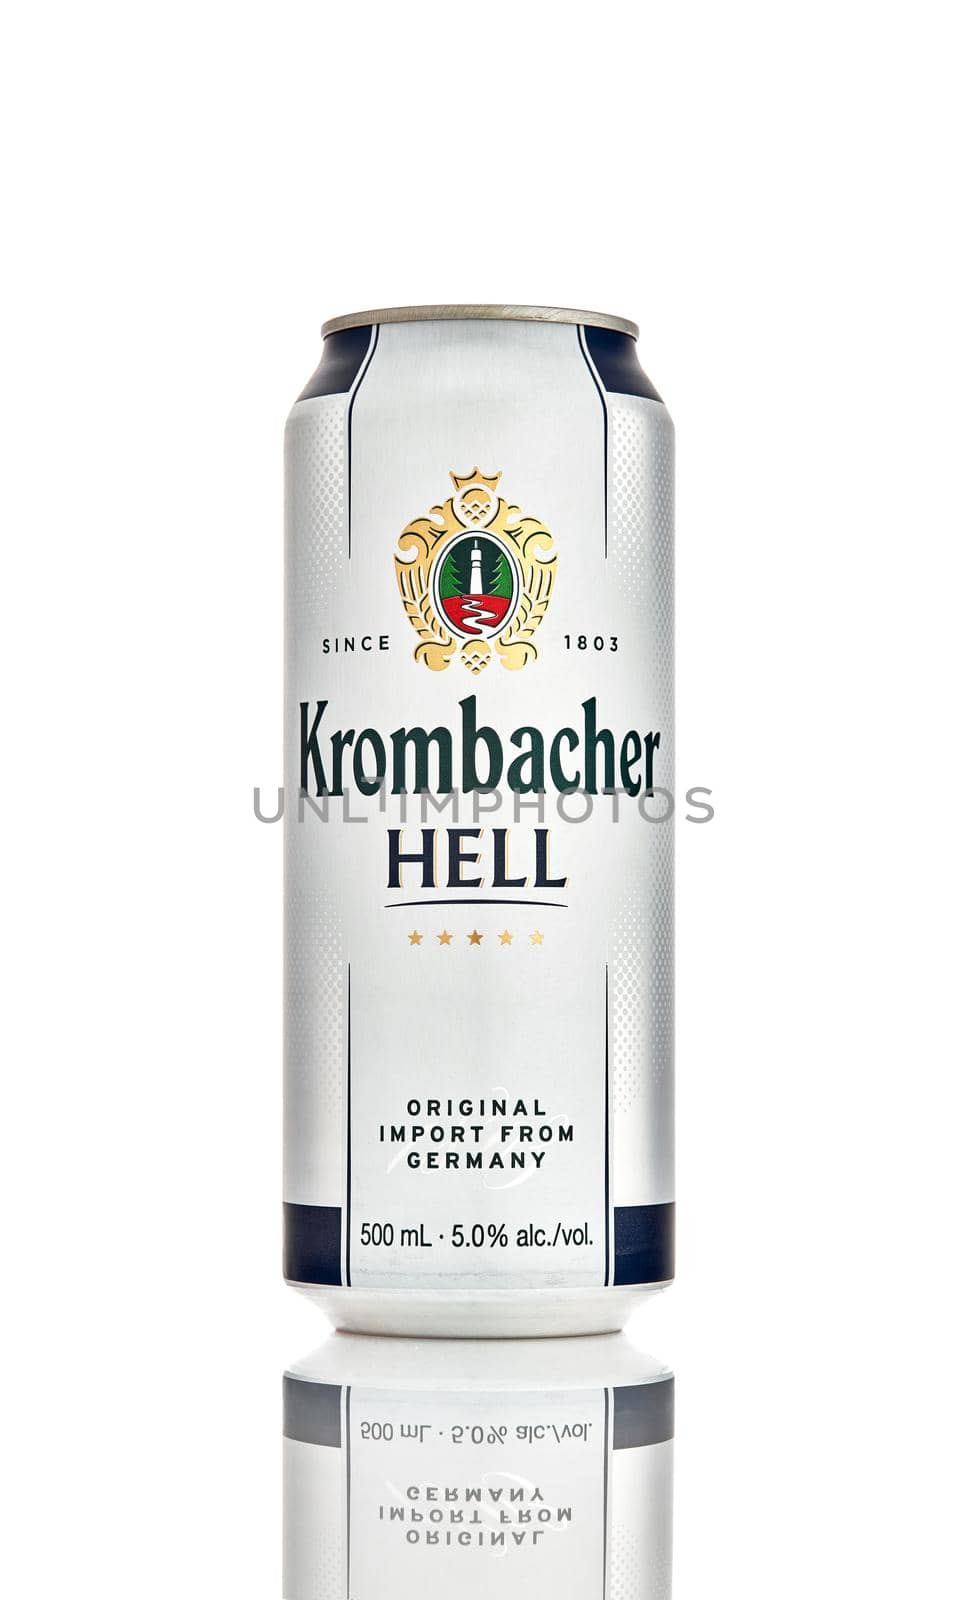 Krombacher hell on white background. Krombacher brewery was founded in 1803 in Germany. 21.06.2019, Rostov-on-Don, Russia.